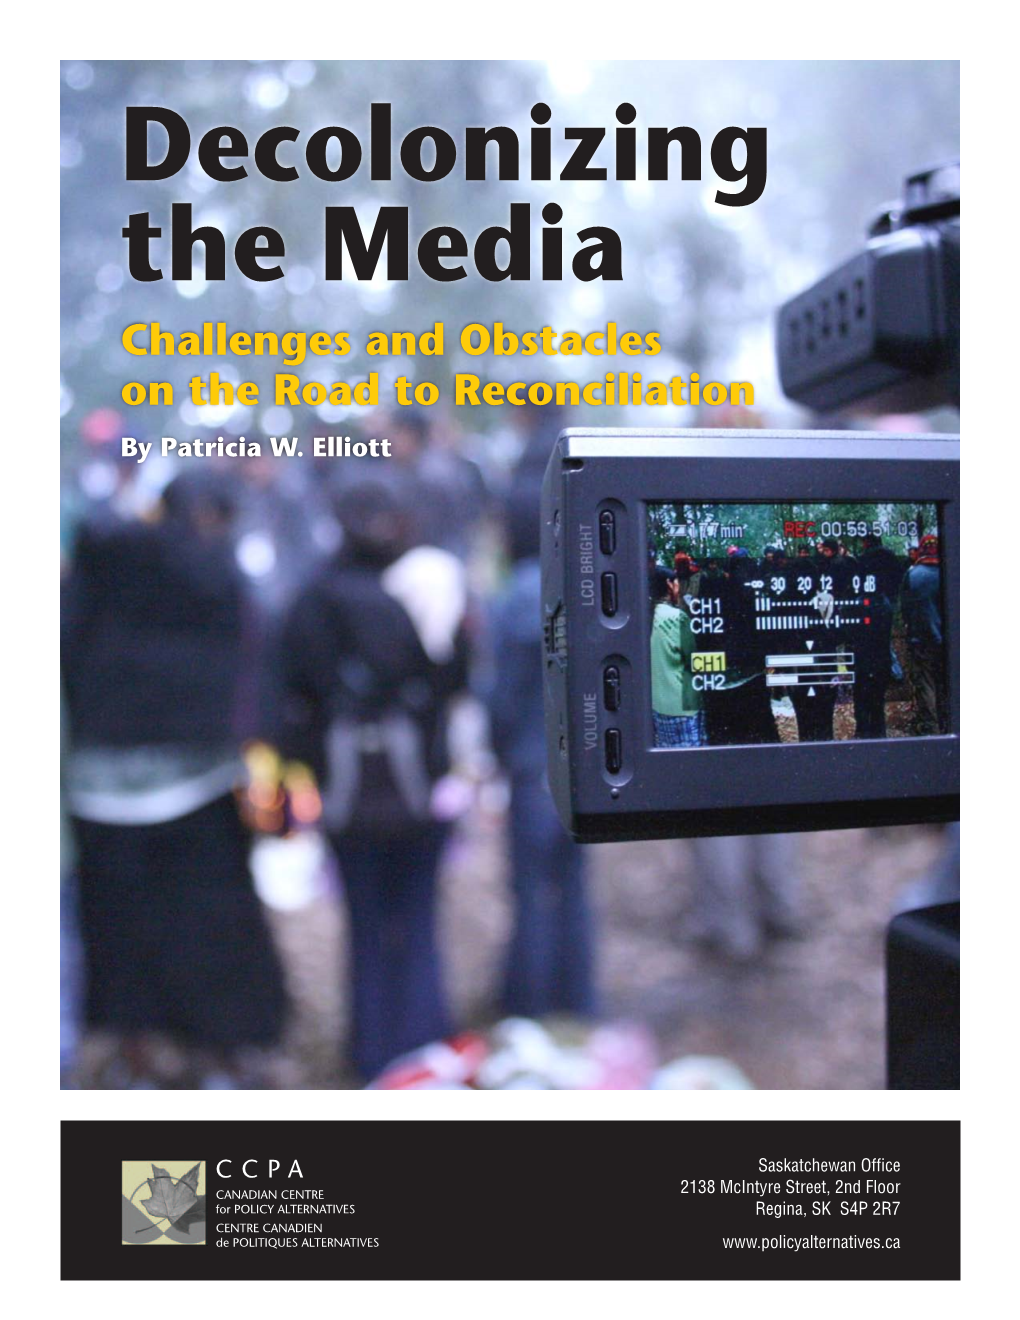 Decolonizing the Media Challenges and Obstacles on the Road to Reconciliation by Patricia W